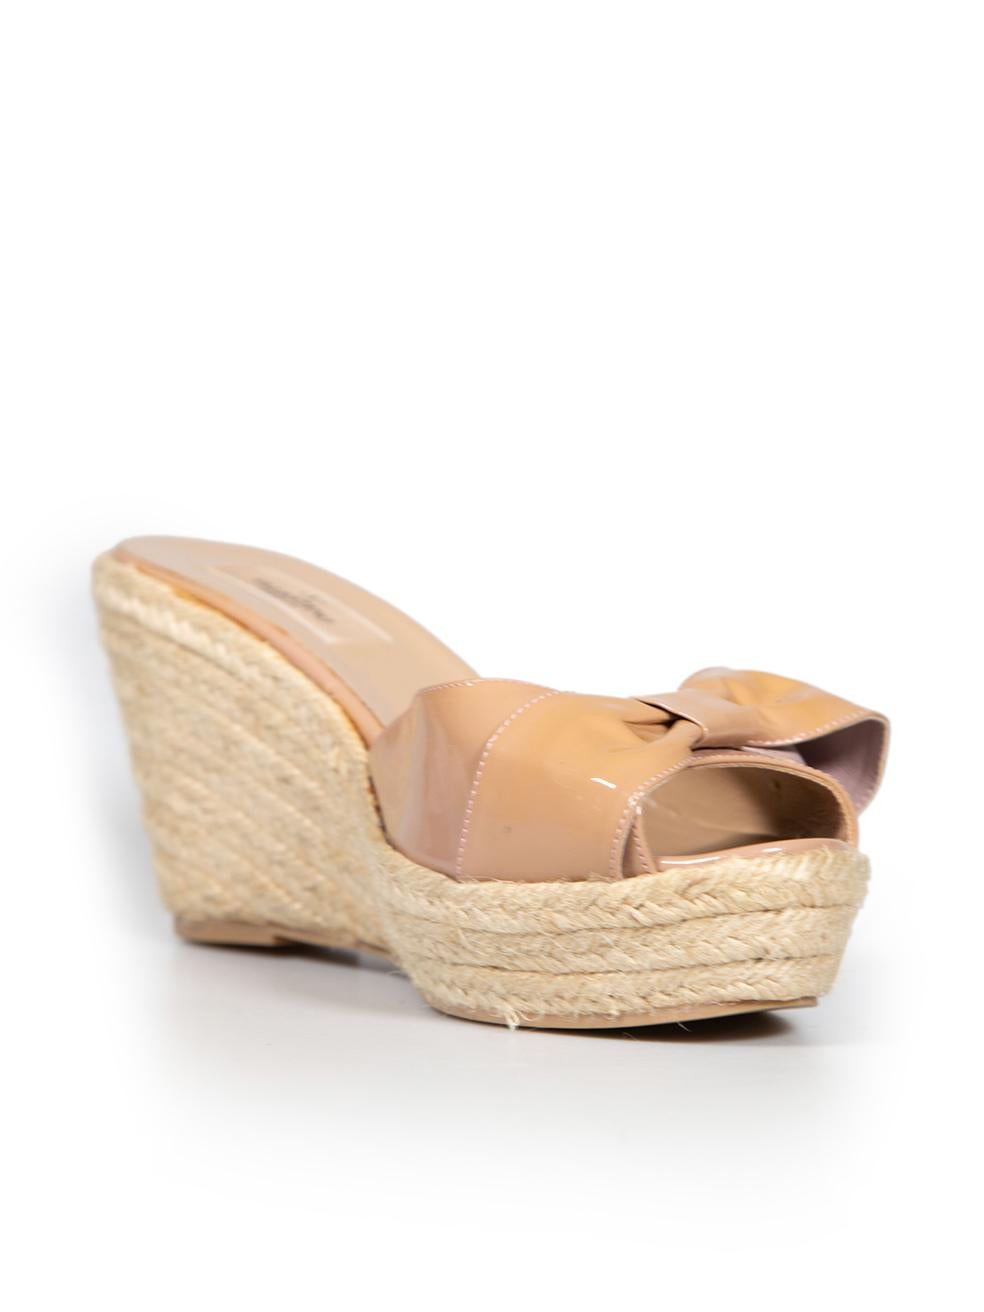 CONDITION is Very good. Minimal wear to sandals is evident. Minimal wear to soles, with some marks to patent leather bows on this used Valentino designer resale item. This item comes with original dust bag.
 
 Details
 Beige
 Patent leather
 Wedge